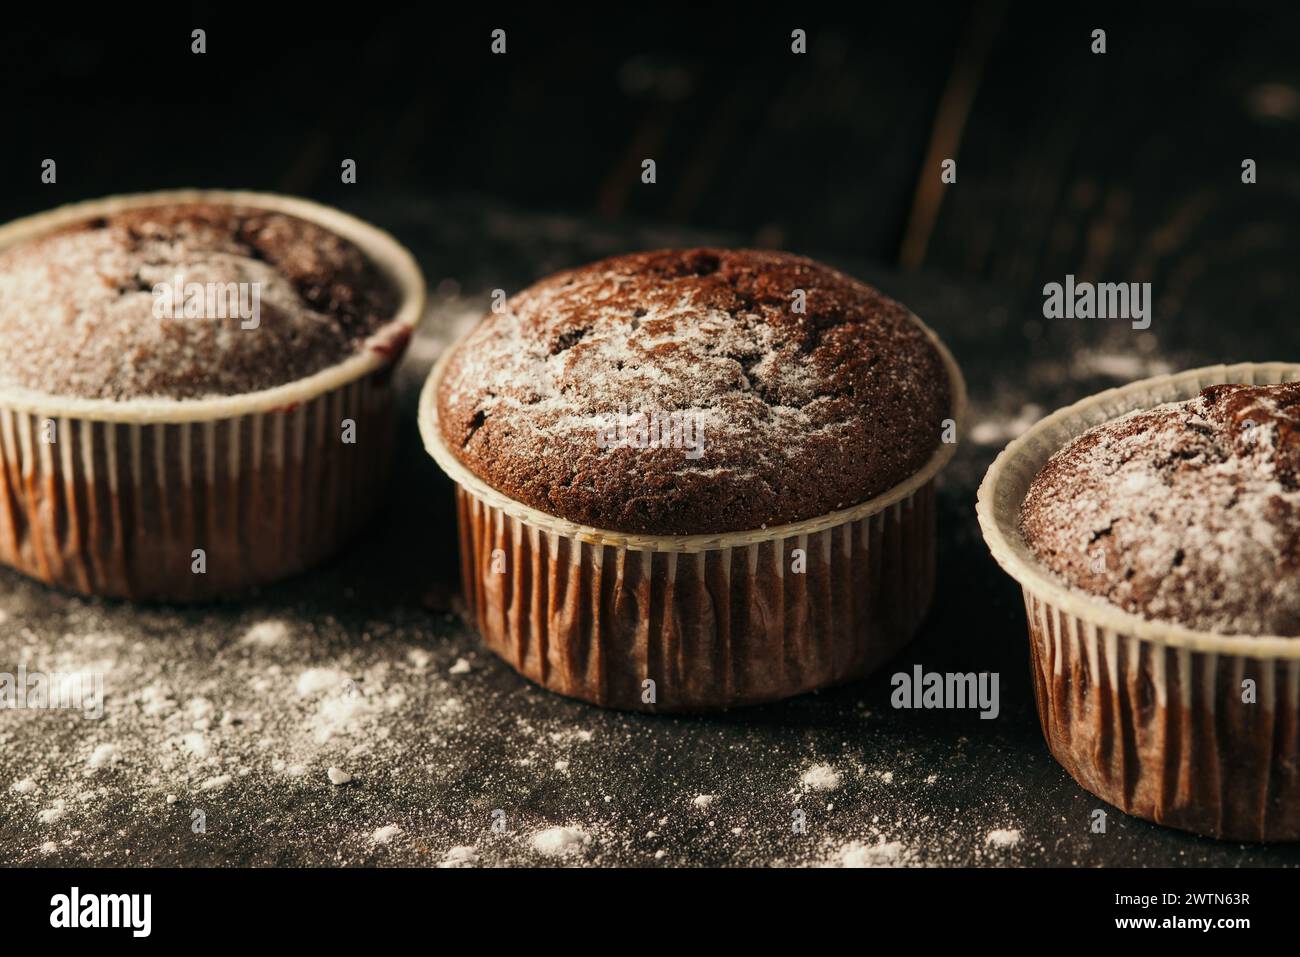 Chocolate muffins with powdered sugar on a black background. Still life close up. Dark moody. Food photo Stock Photo